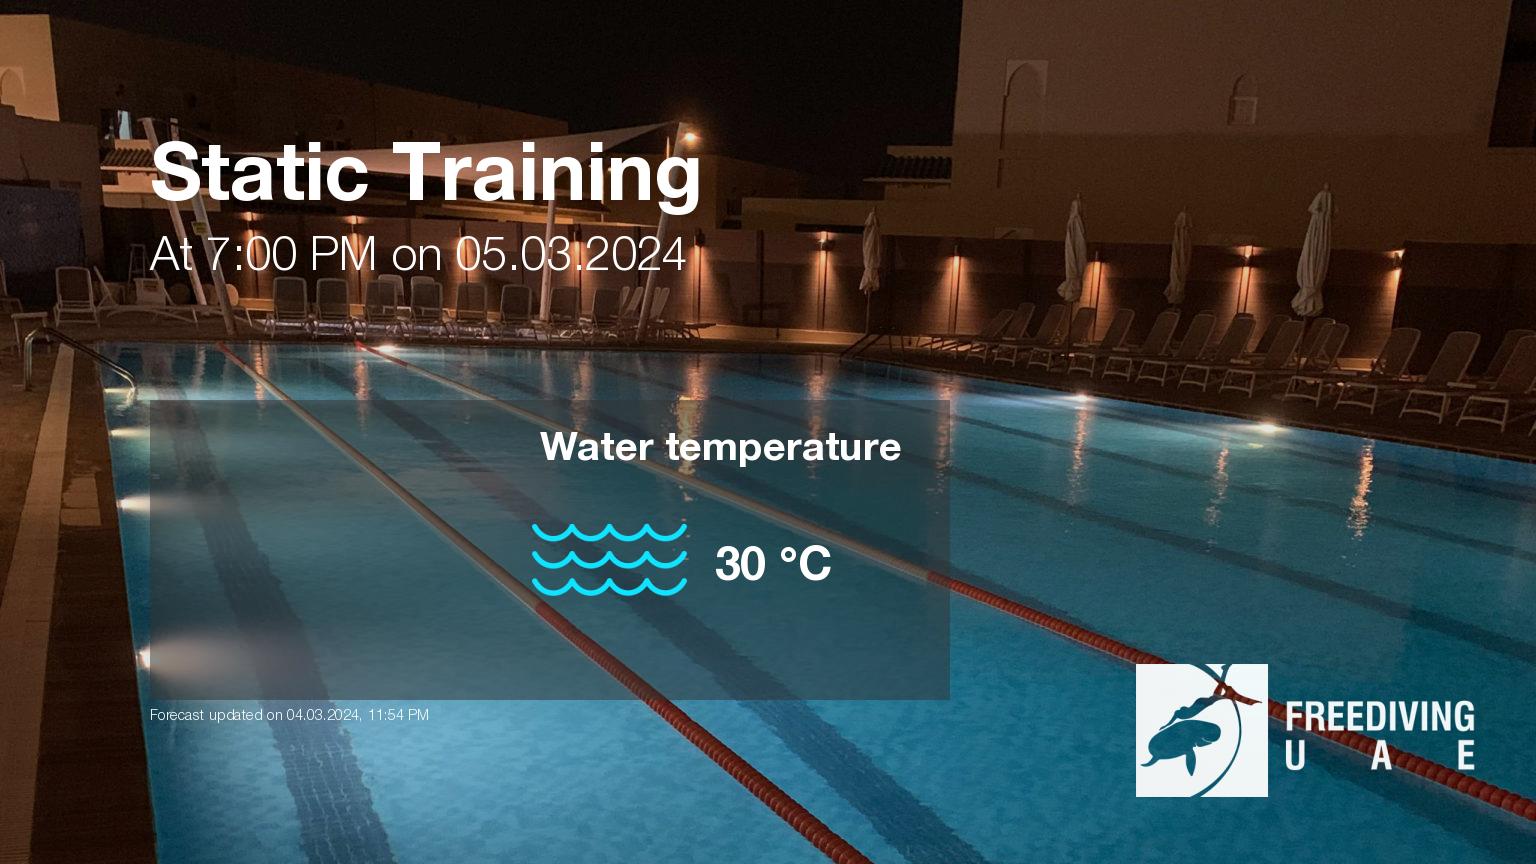 Expected weather during Static Training on Tue, Mar 5, at 7:00 PM